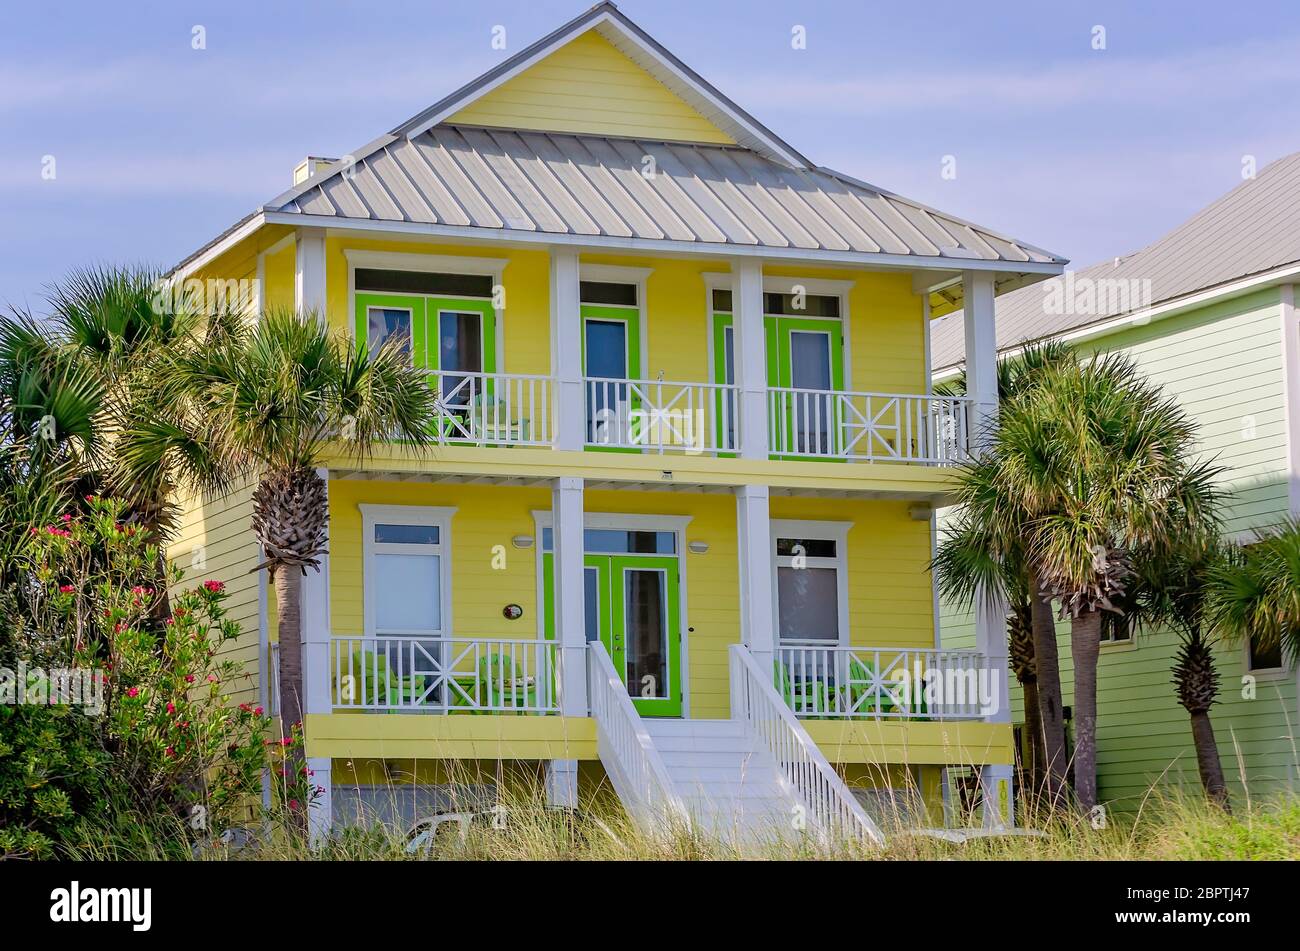 A vacation rental, typical of modern coastal architecture, offers close proximity to Pensacola Beach, May 16, 2020, in Gulf Breeze, Florida. Stock Photo